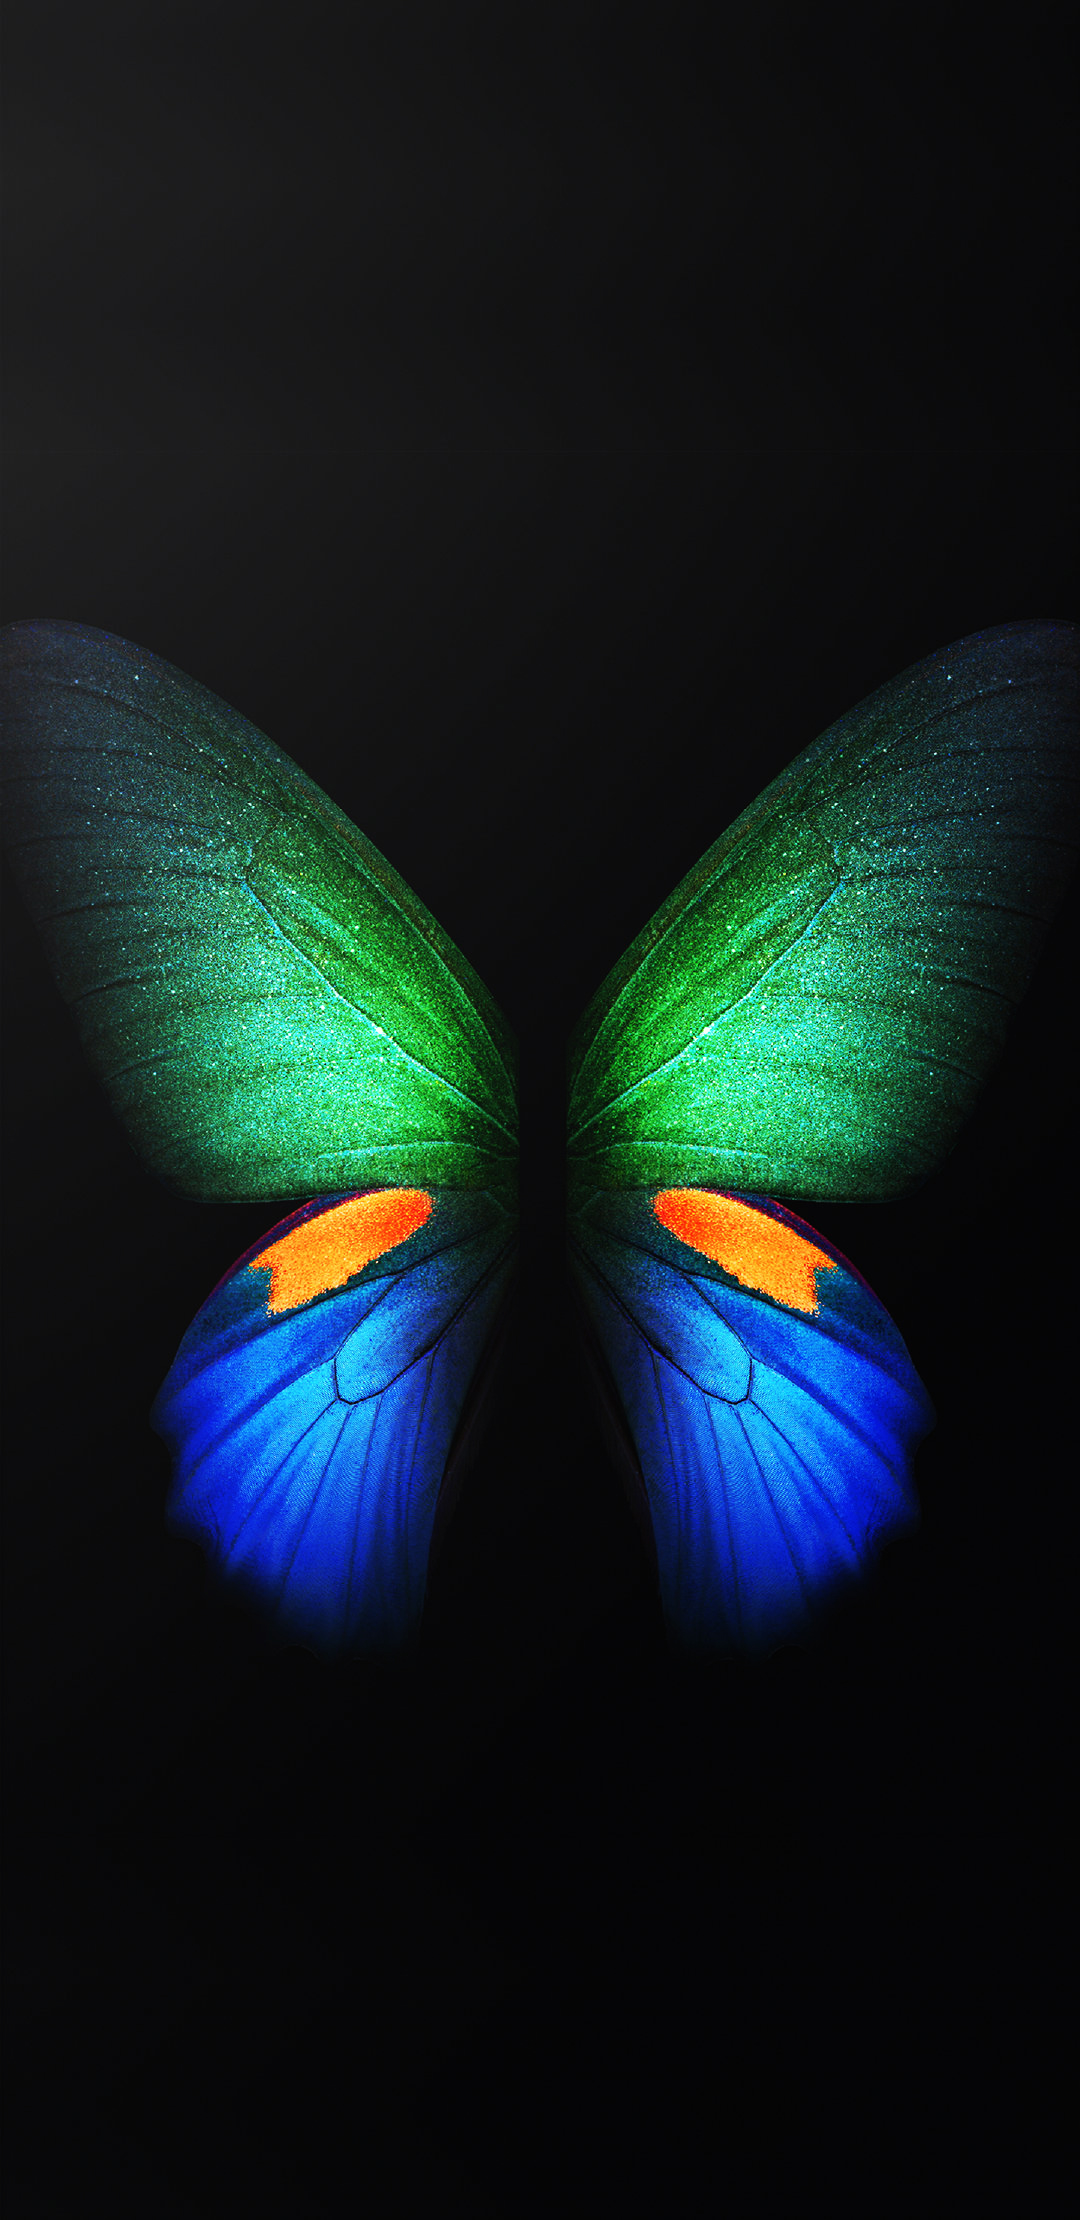 samsung stock wallpapers,butterfly,insect,blue,green,moths and butterflies